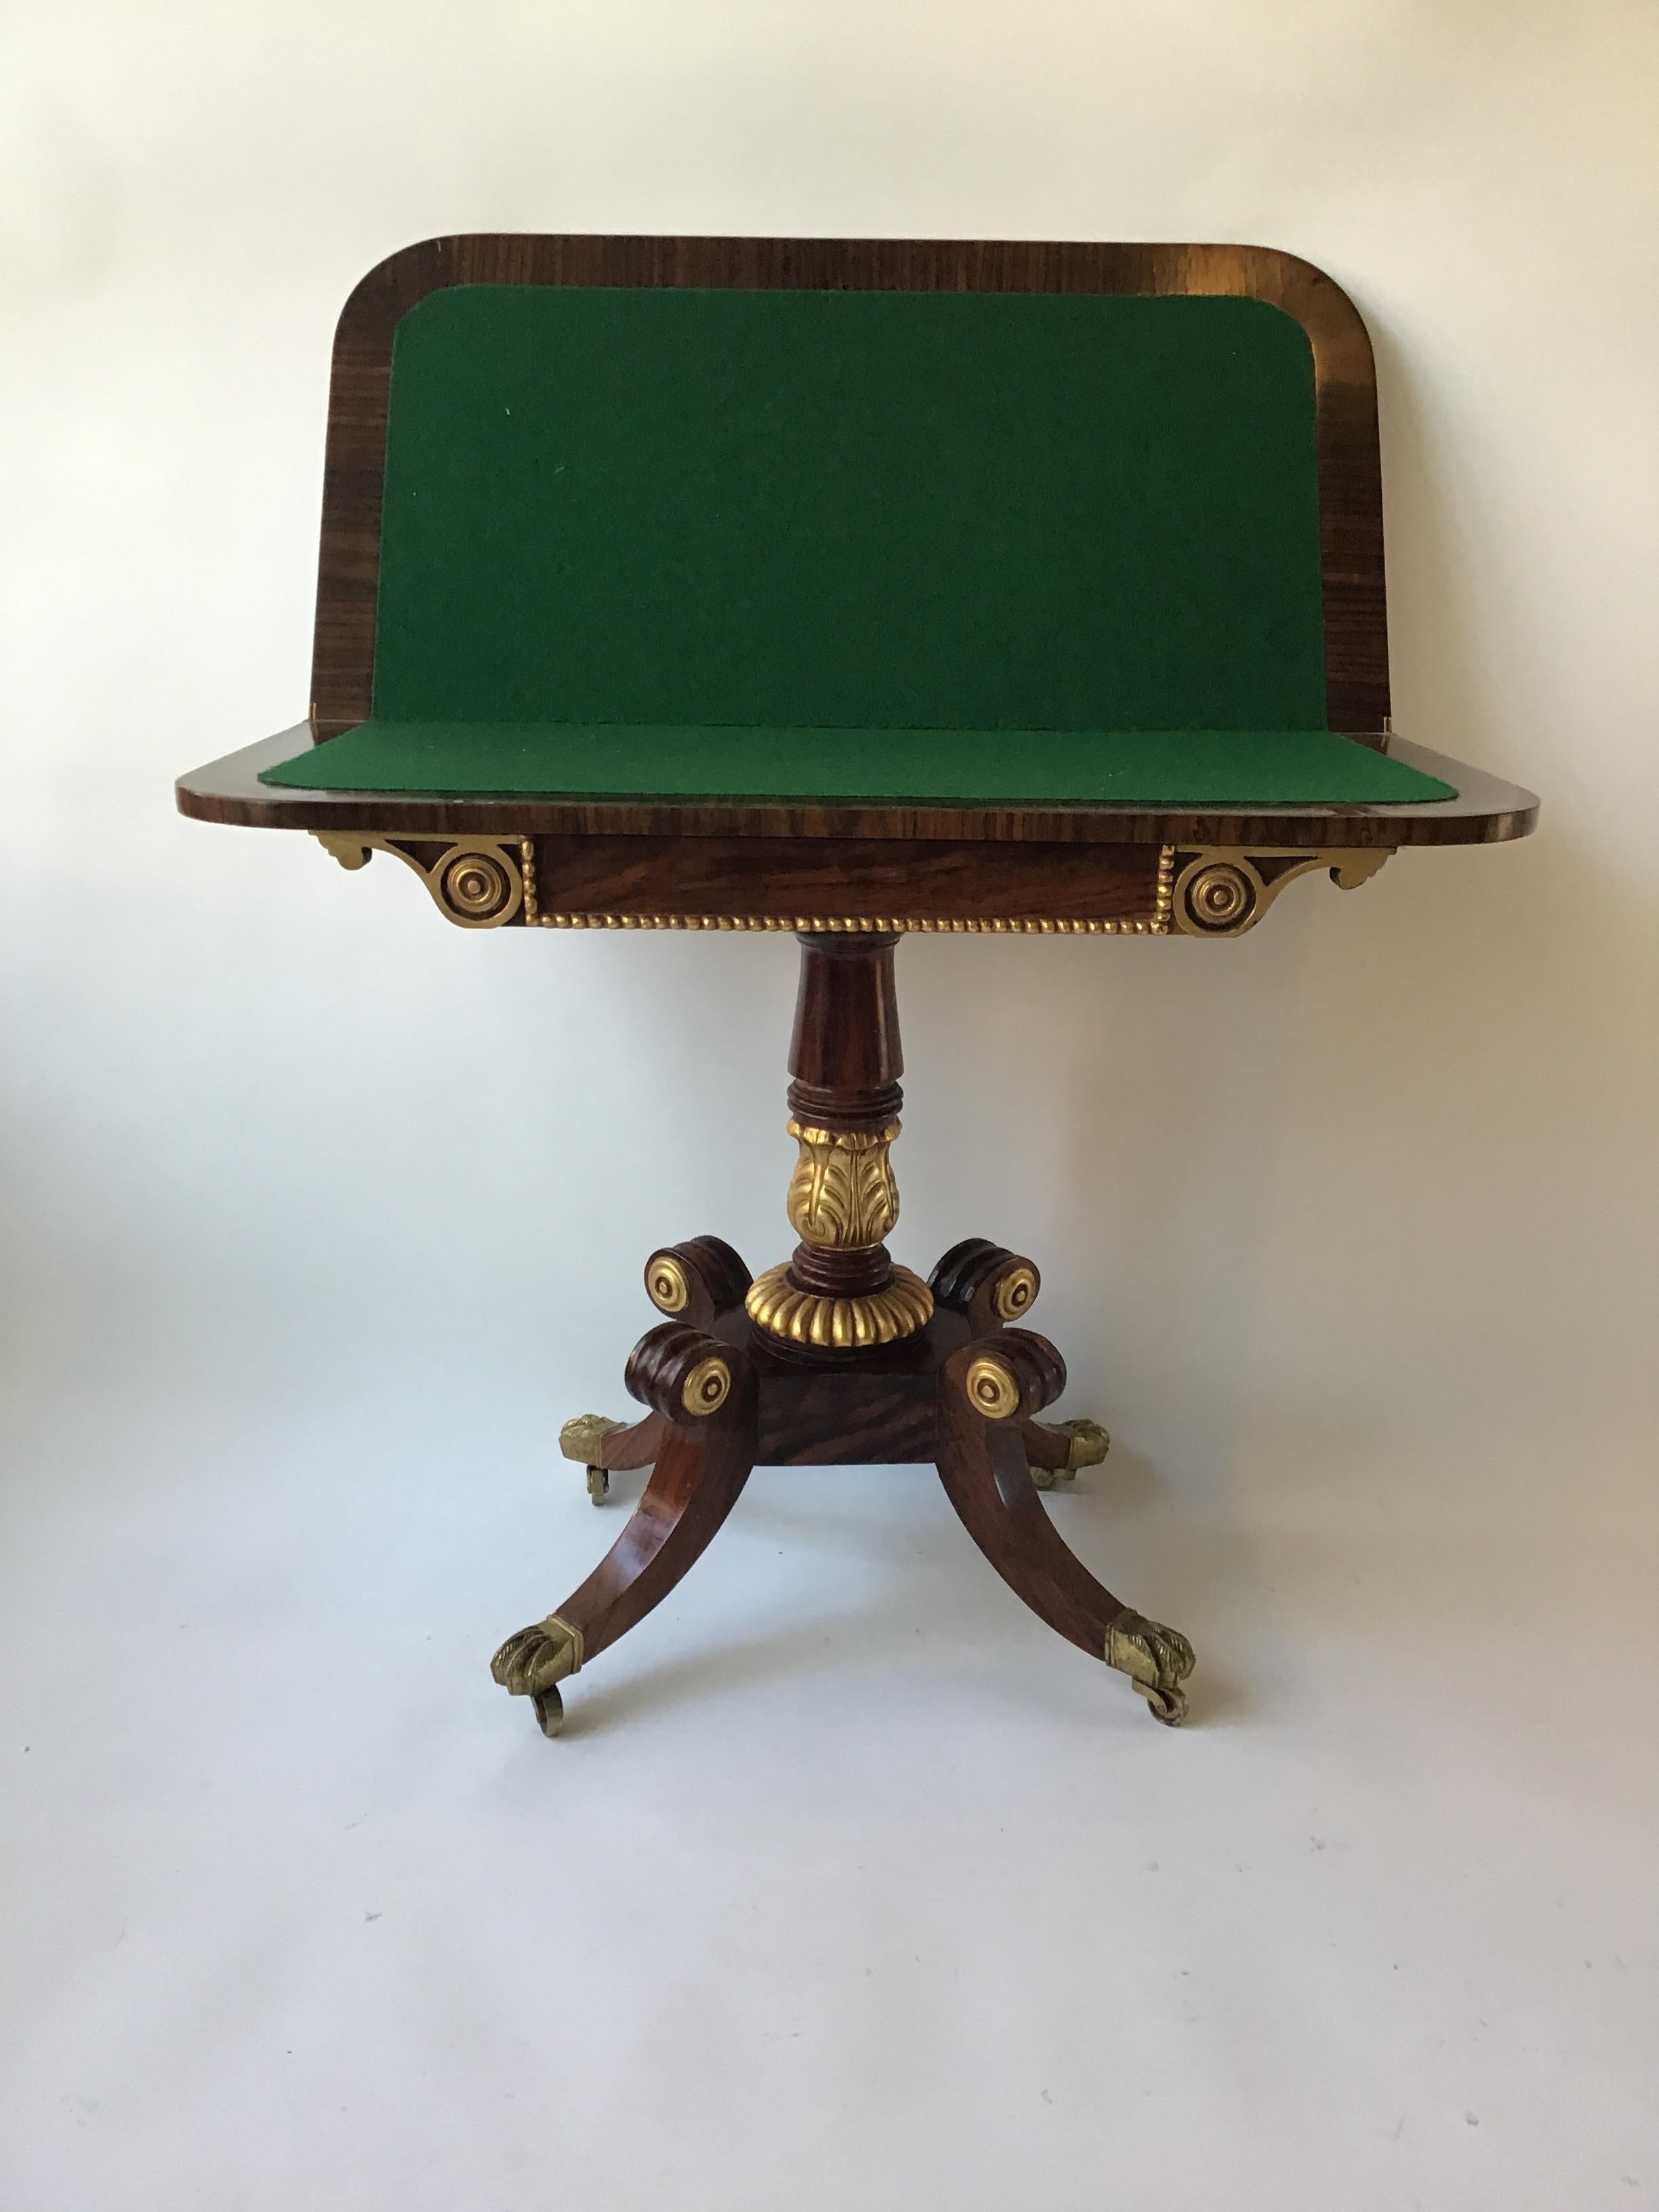 Regency style game table with gilt accents. Compartment to hold game pieces. Brass feet.